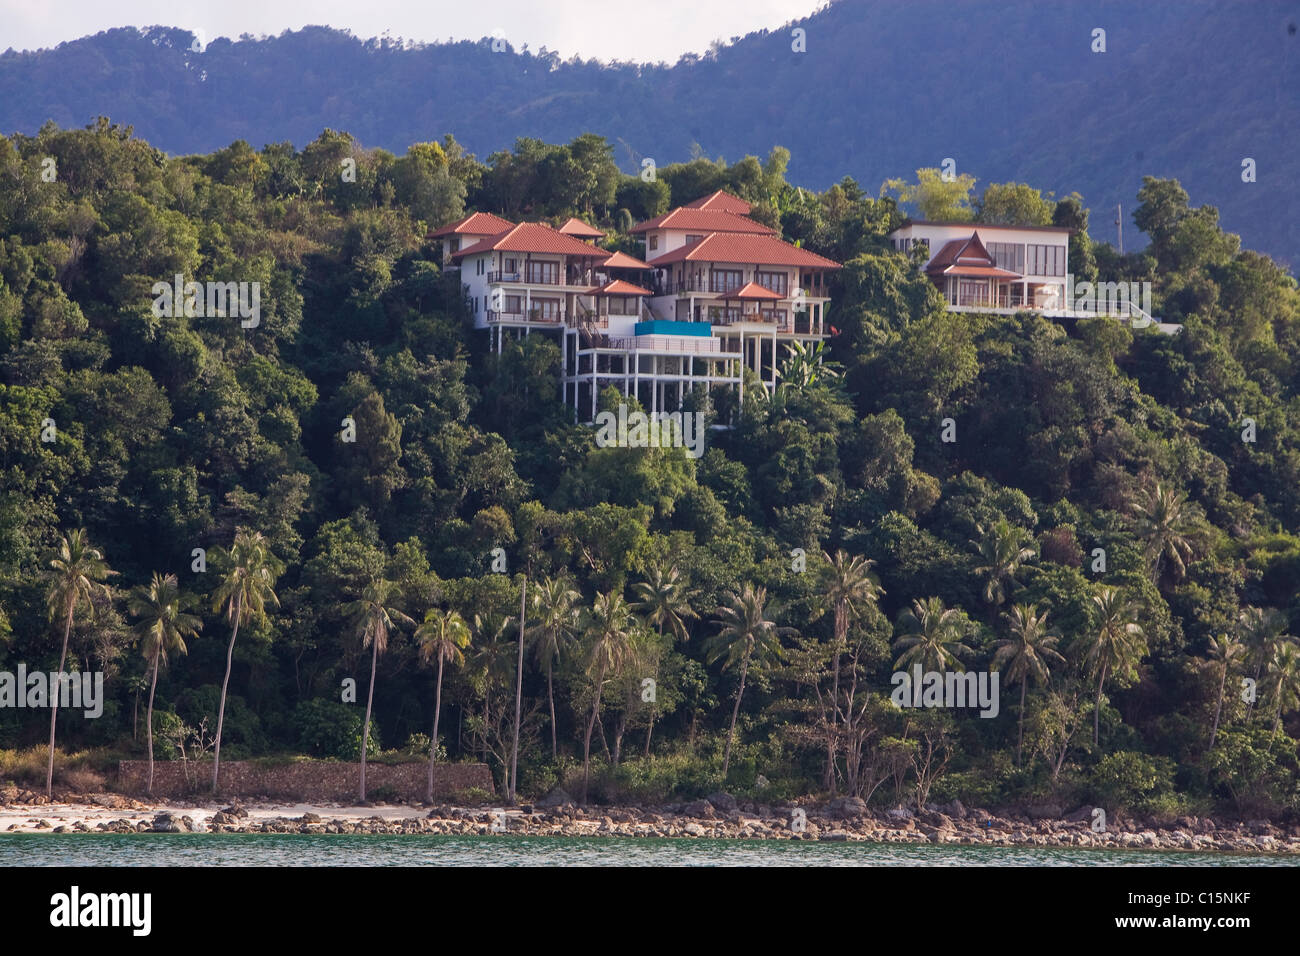 David and Victoria Beckham's house (right) on the island Koh Samui. The couple bought the house in 2007 for about 4.5m Euro. Stock Photo